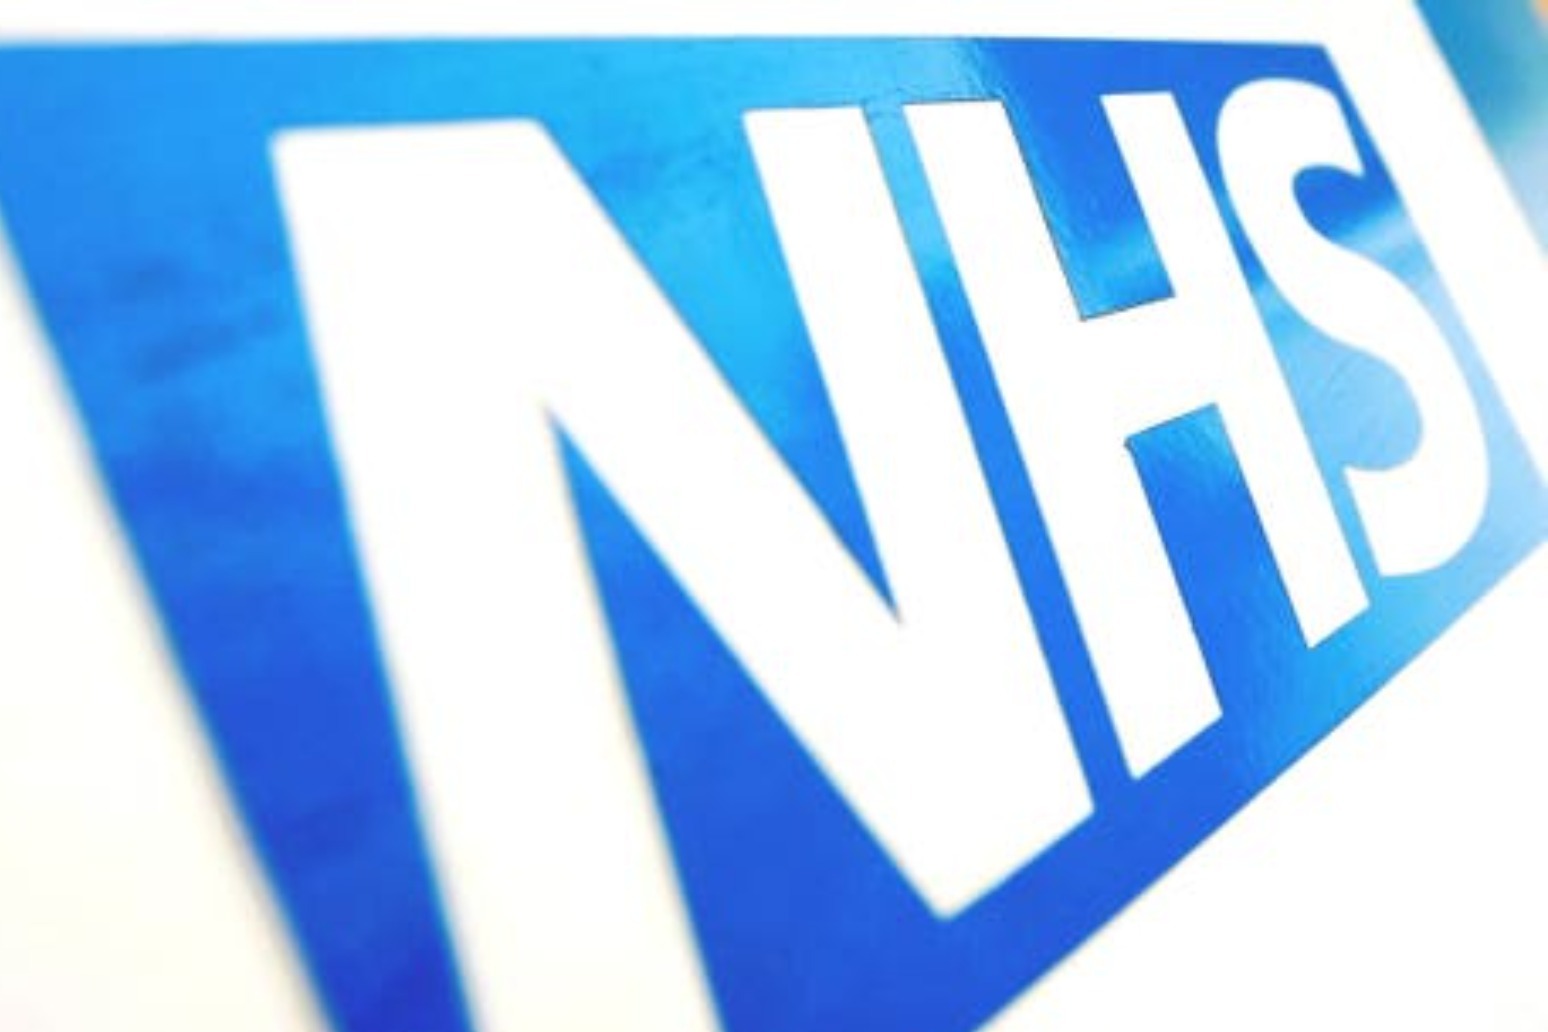 ‘One in six people’ in England could be on NHS waiting list by April 